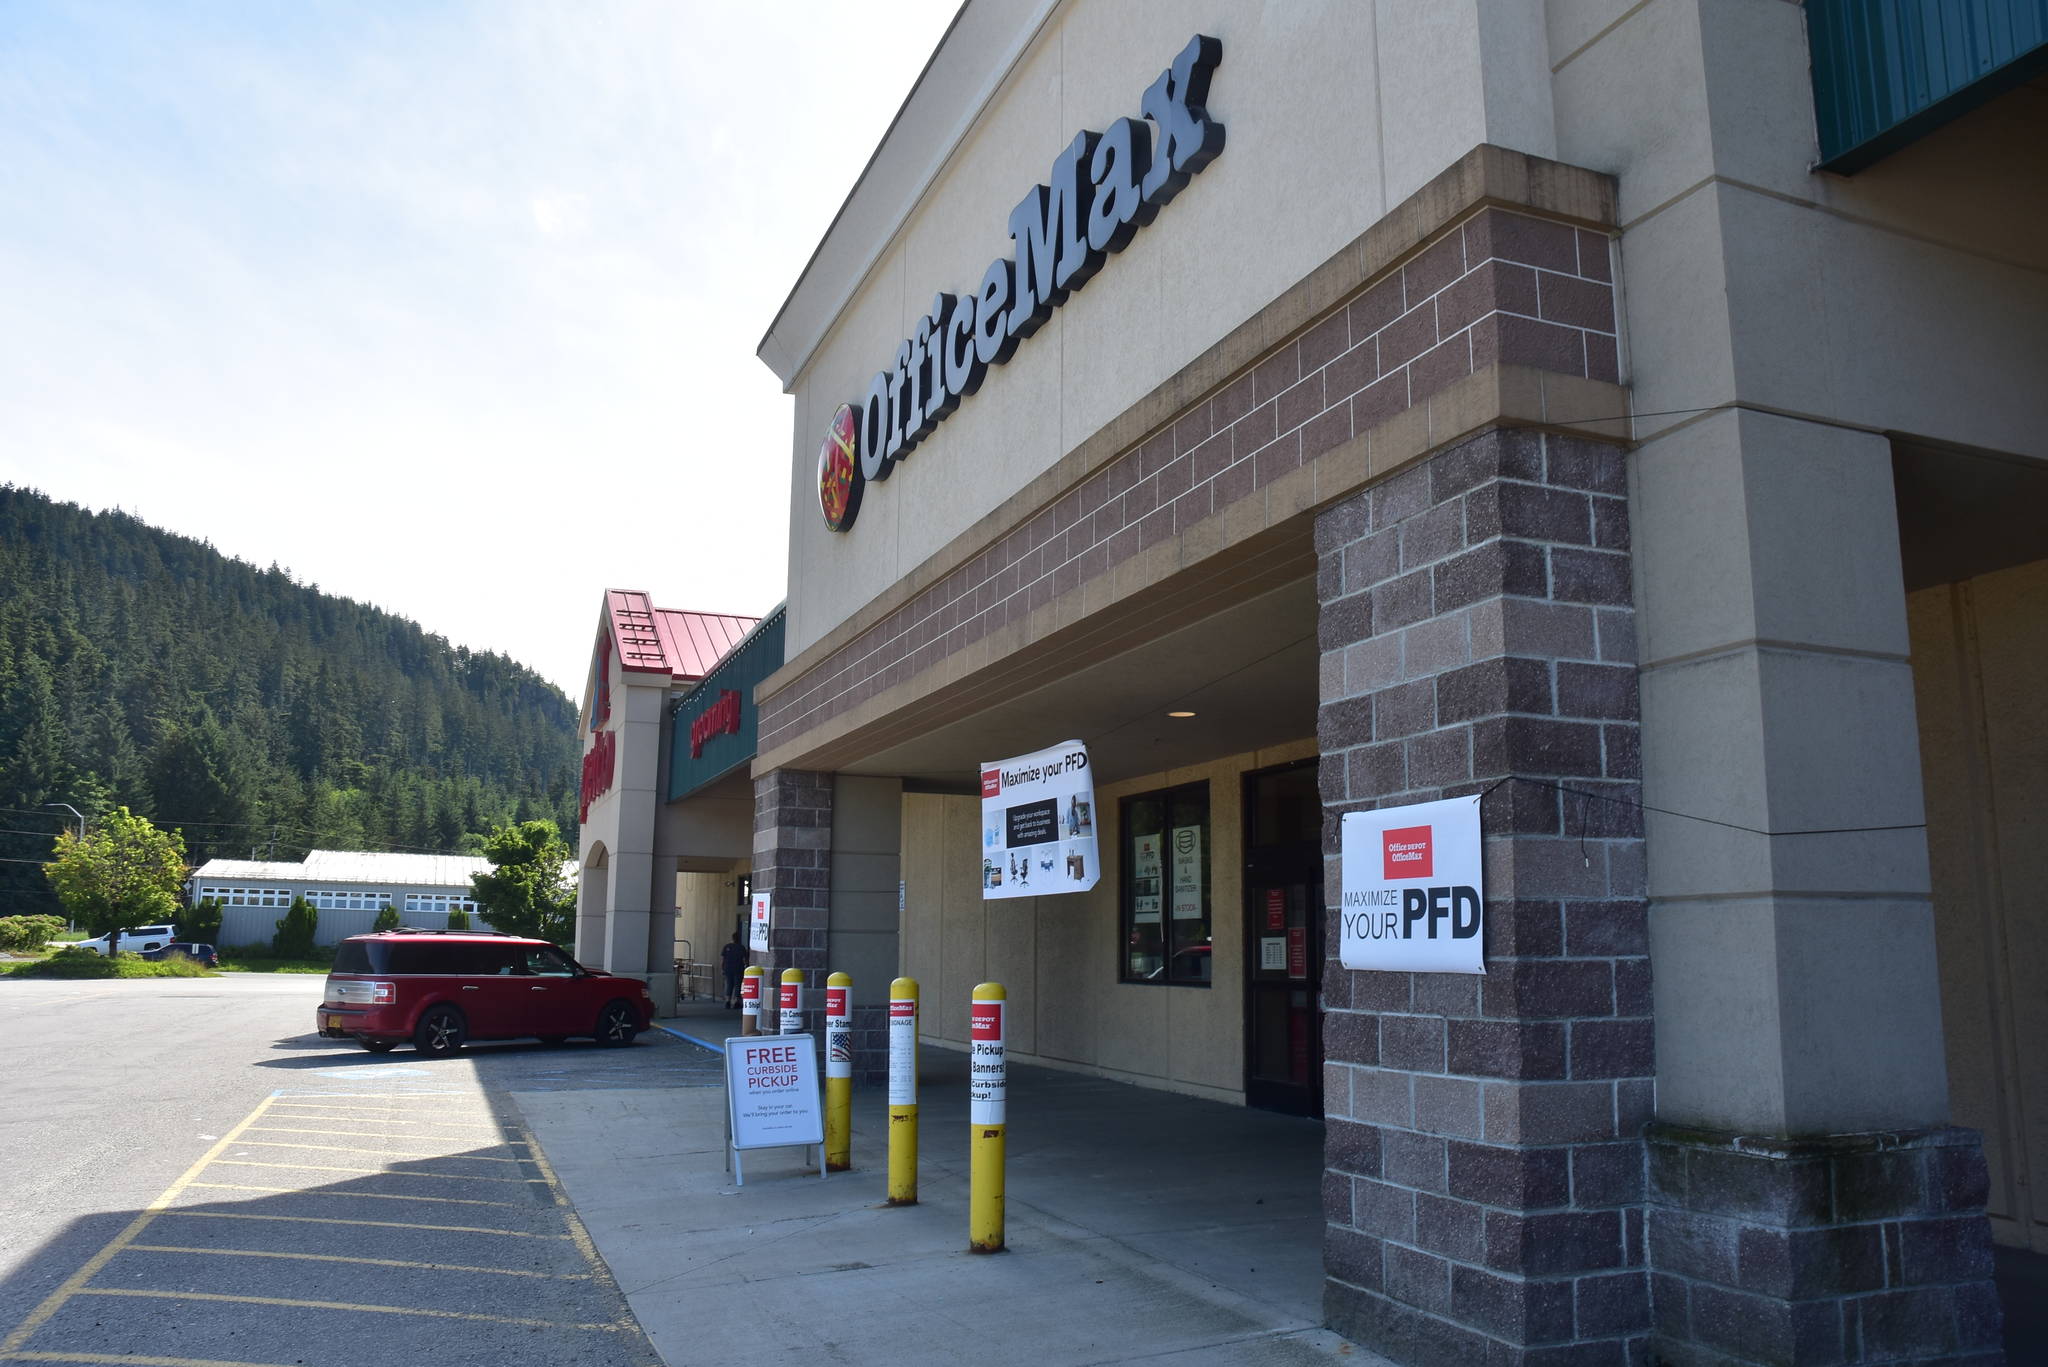 Signs advertise Permanent Fund Dividend sales in front of Office Max at the Nugget Mall in the Mendenhall Valley hason Thursday, July 2, 2020. (Peter Segall | Juneau Empire)